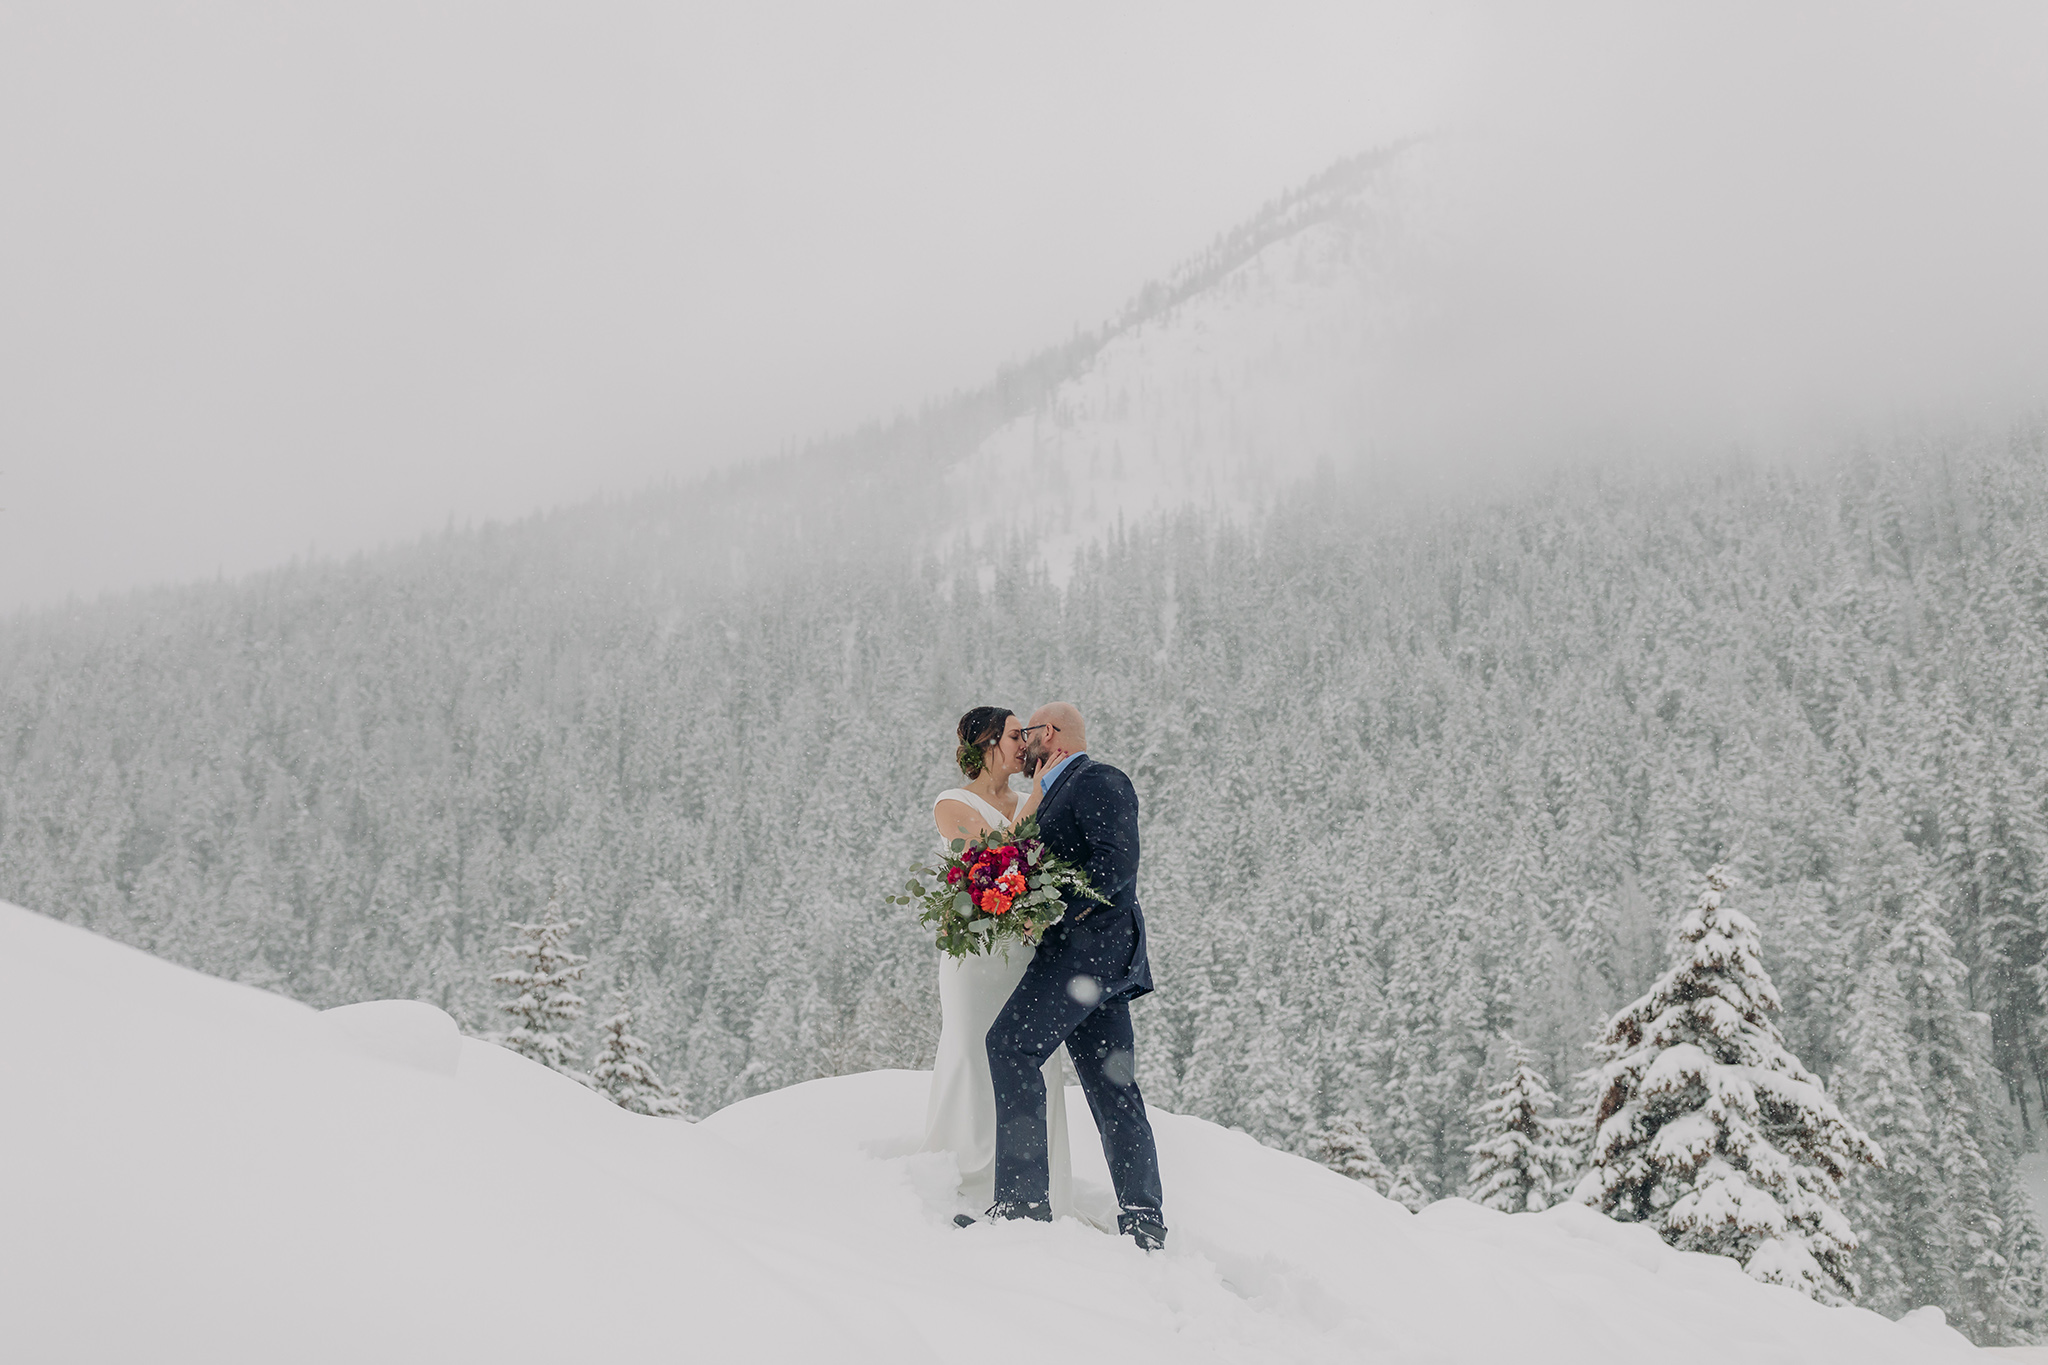 snowy mountain elopement bride & groom portraits climbing snow bank with falling snow photographed by mountain elopement & wedding photographer ENV Photography